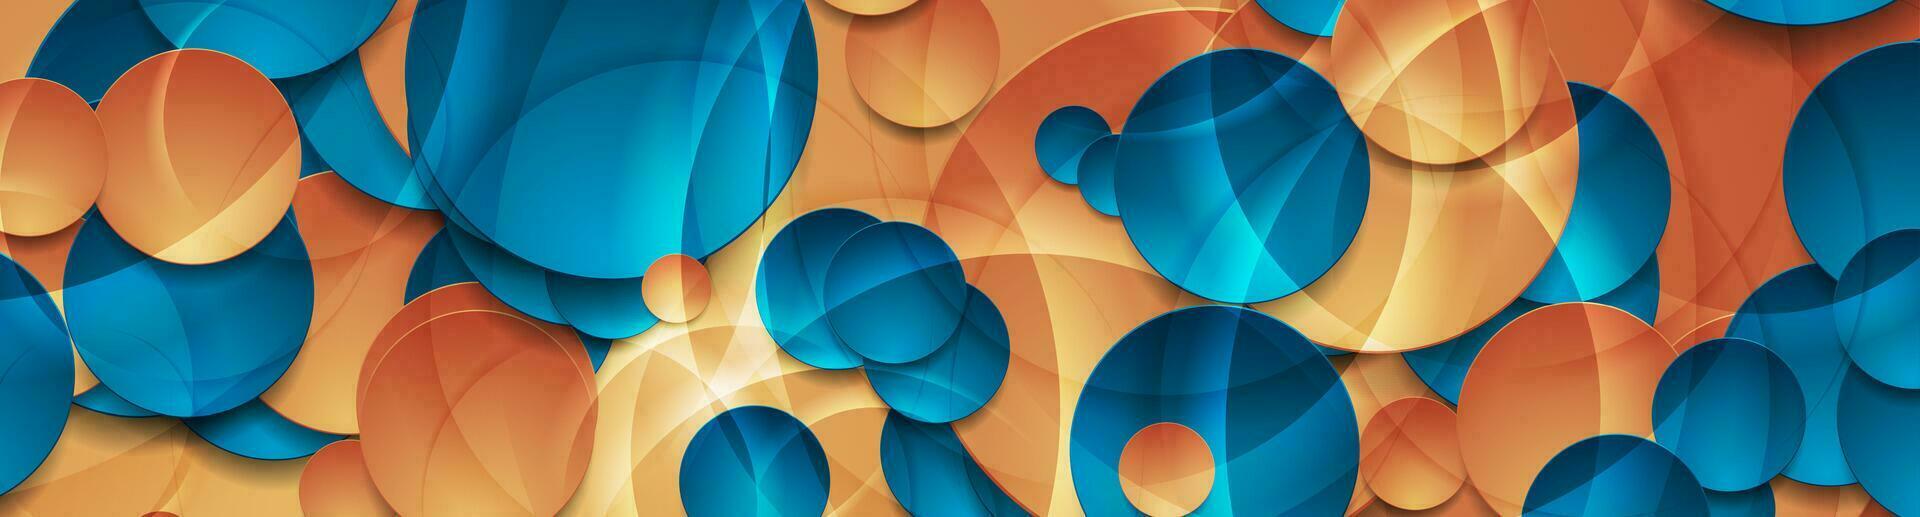 Vibrant glossy blue and orange circles abstract background vector